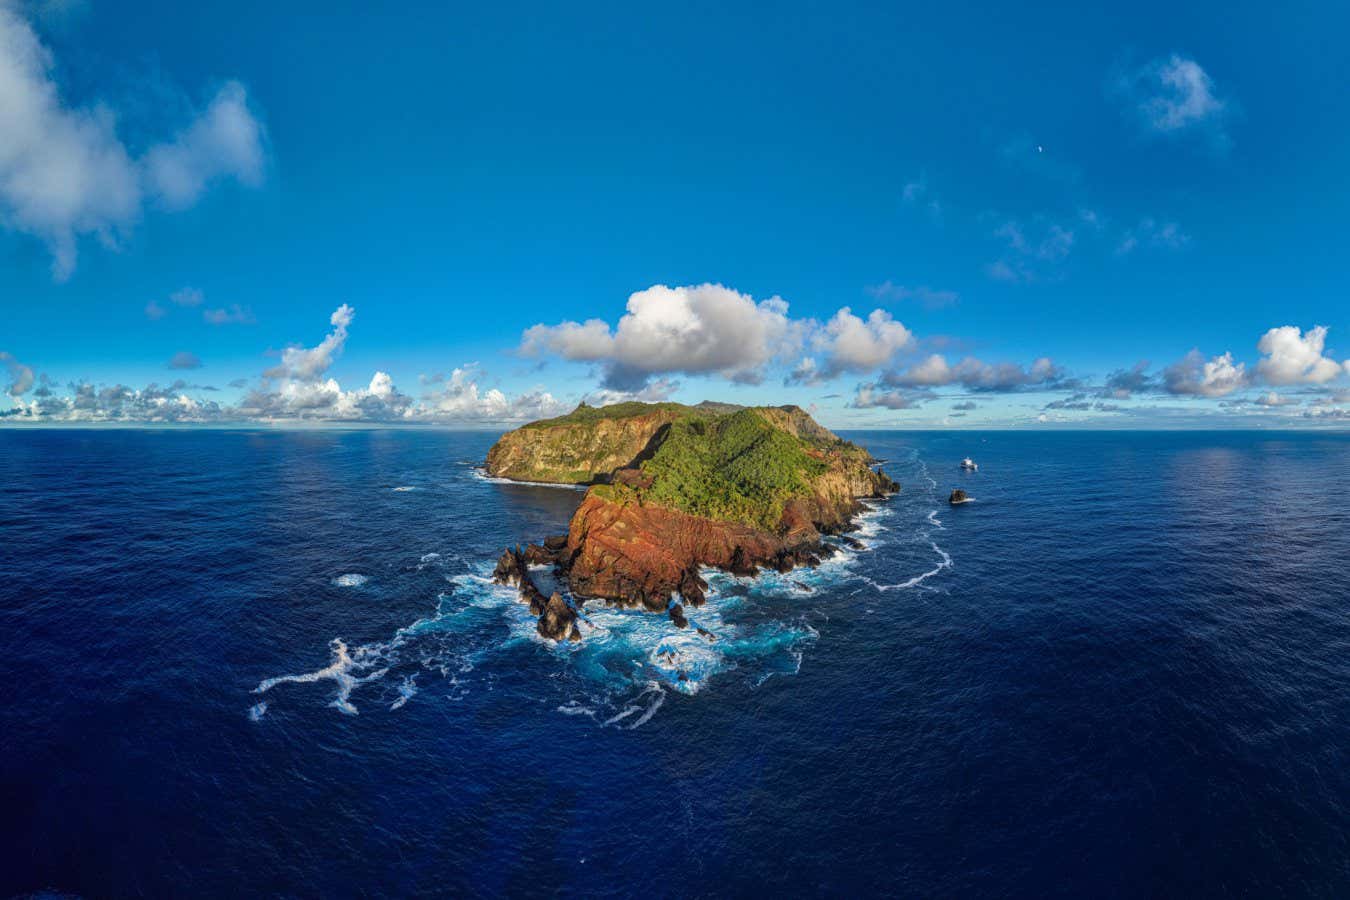 How the infamous Pitcairn Island became a model of ocean conservation